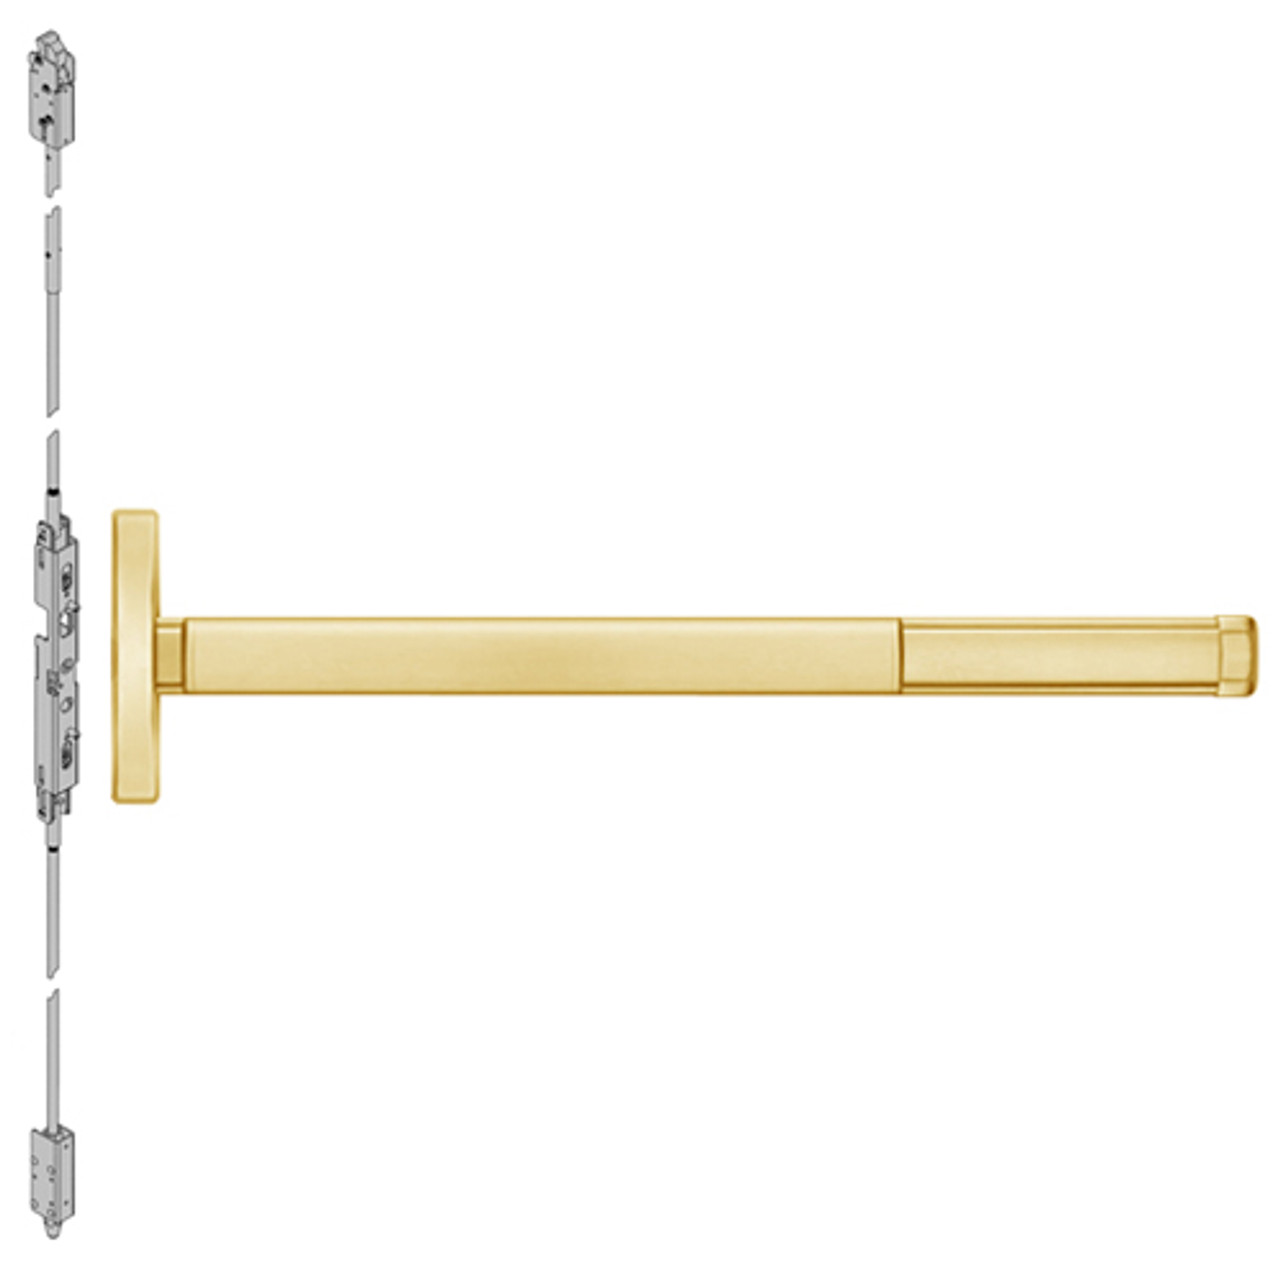 FL2601LBR-605-48 PHI 2600 Series Fire Rated Concealed Vertical Rod Exit Device Prepped for Cover Plate with Less Bottom Rod in Bright Brass Finish